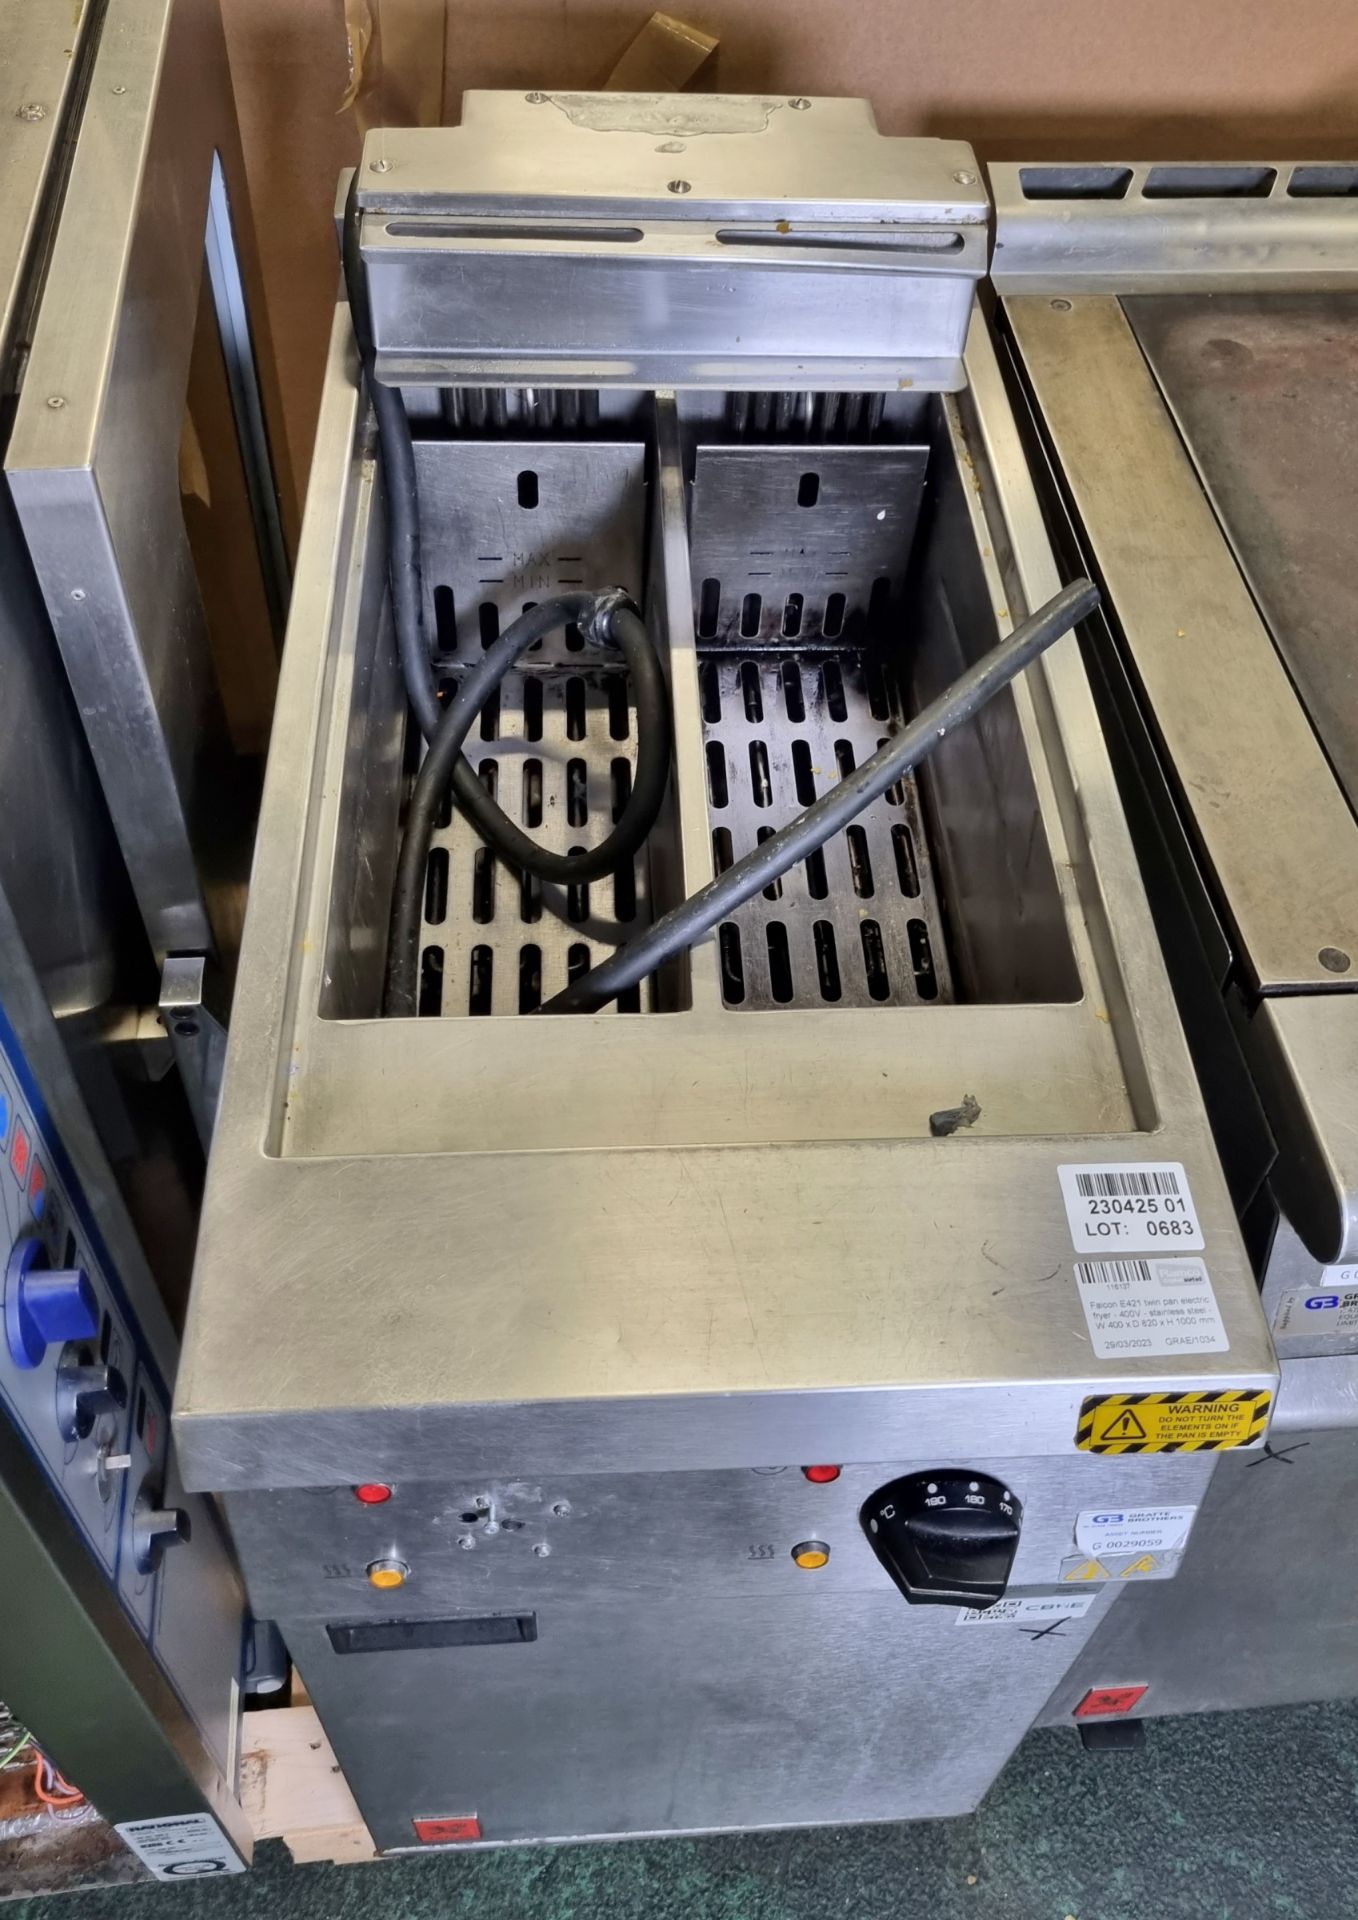 Falcon E421 twin pan electric fryer - 400V - stainless steel - W 400 x D 820 x H 1000 mm - Image 2 of 4